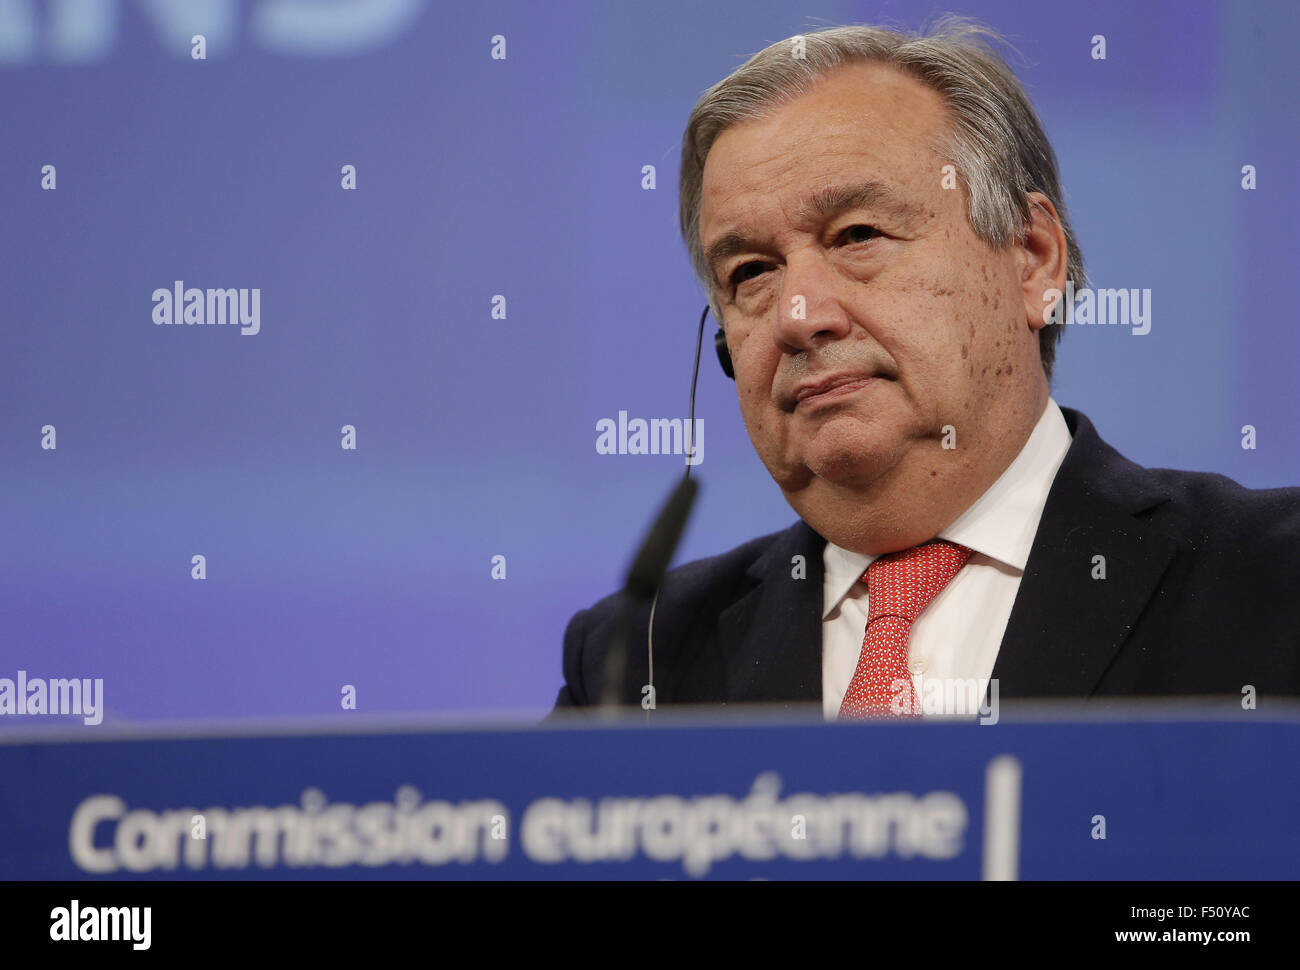 Brussels, Belgium. 26th Oct, 2015. The UN's High Commissioner for Refugees Antonio Guterres speaks during a press conference at the end of the special EU summit with Western Balkan nations situated along the migrant routes into Europe in Brussels, Belgium, on Oct. 26, 2015. The European Union (EU) and Balkan countries are seeking further cooperation on tackling migrant crisis at a mini summit held here on Sunday. Credit:  Zhou Lei/Xinhua/Alamy Live News Stock Photo